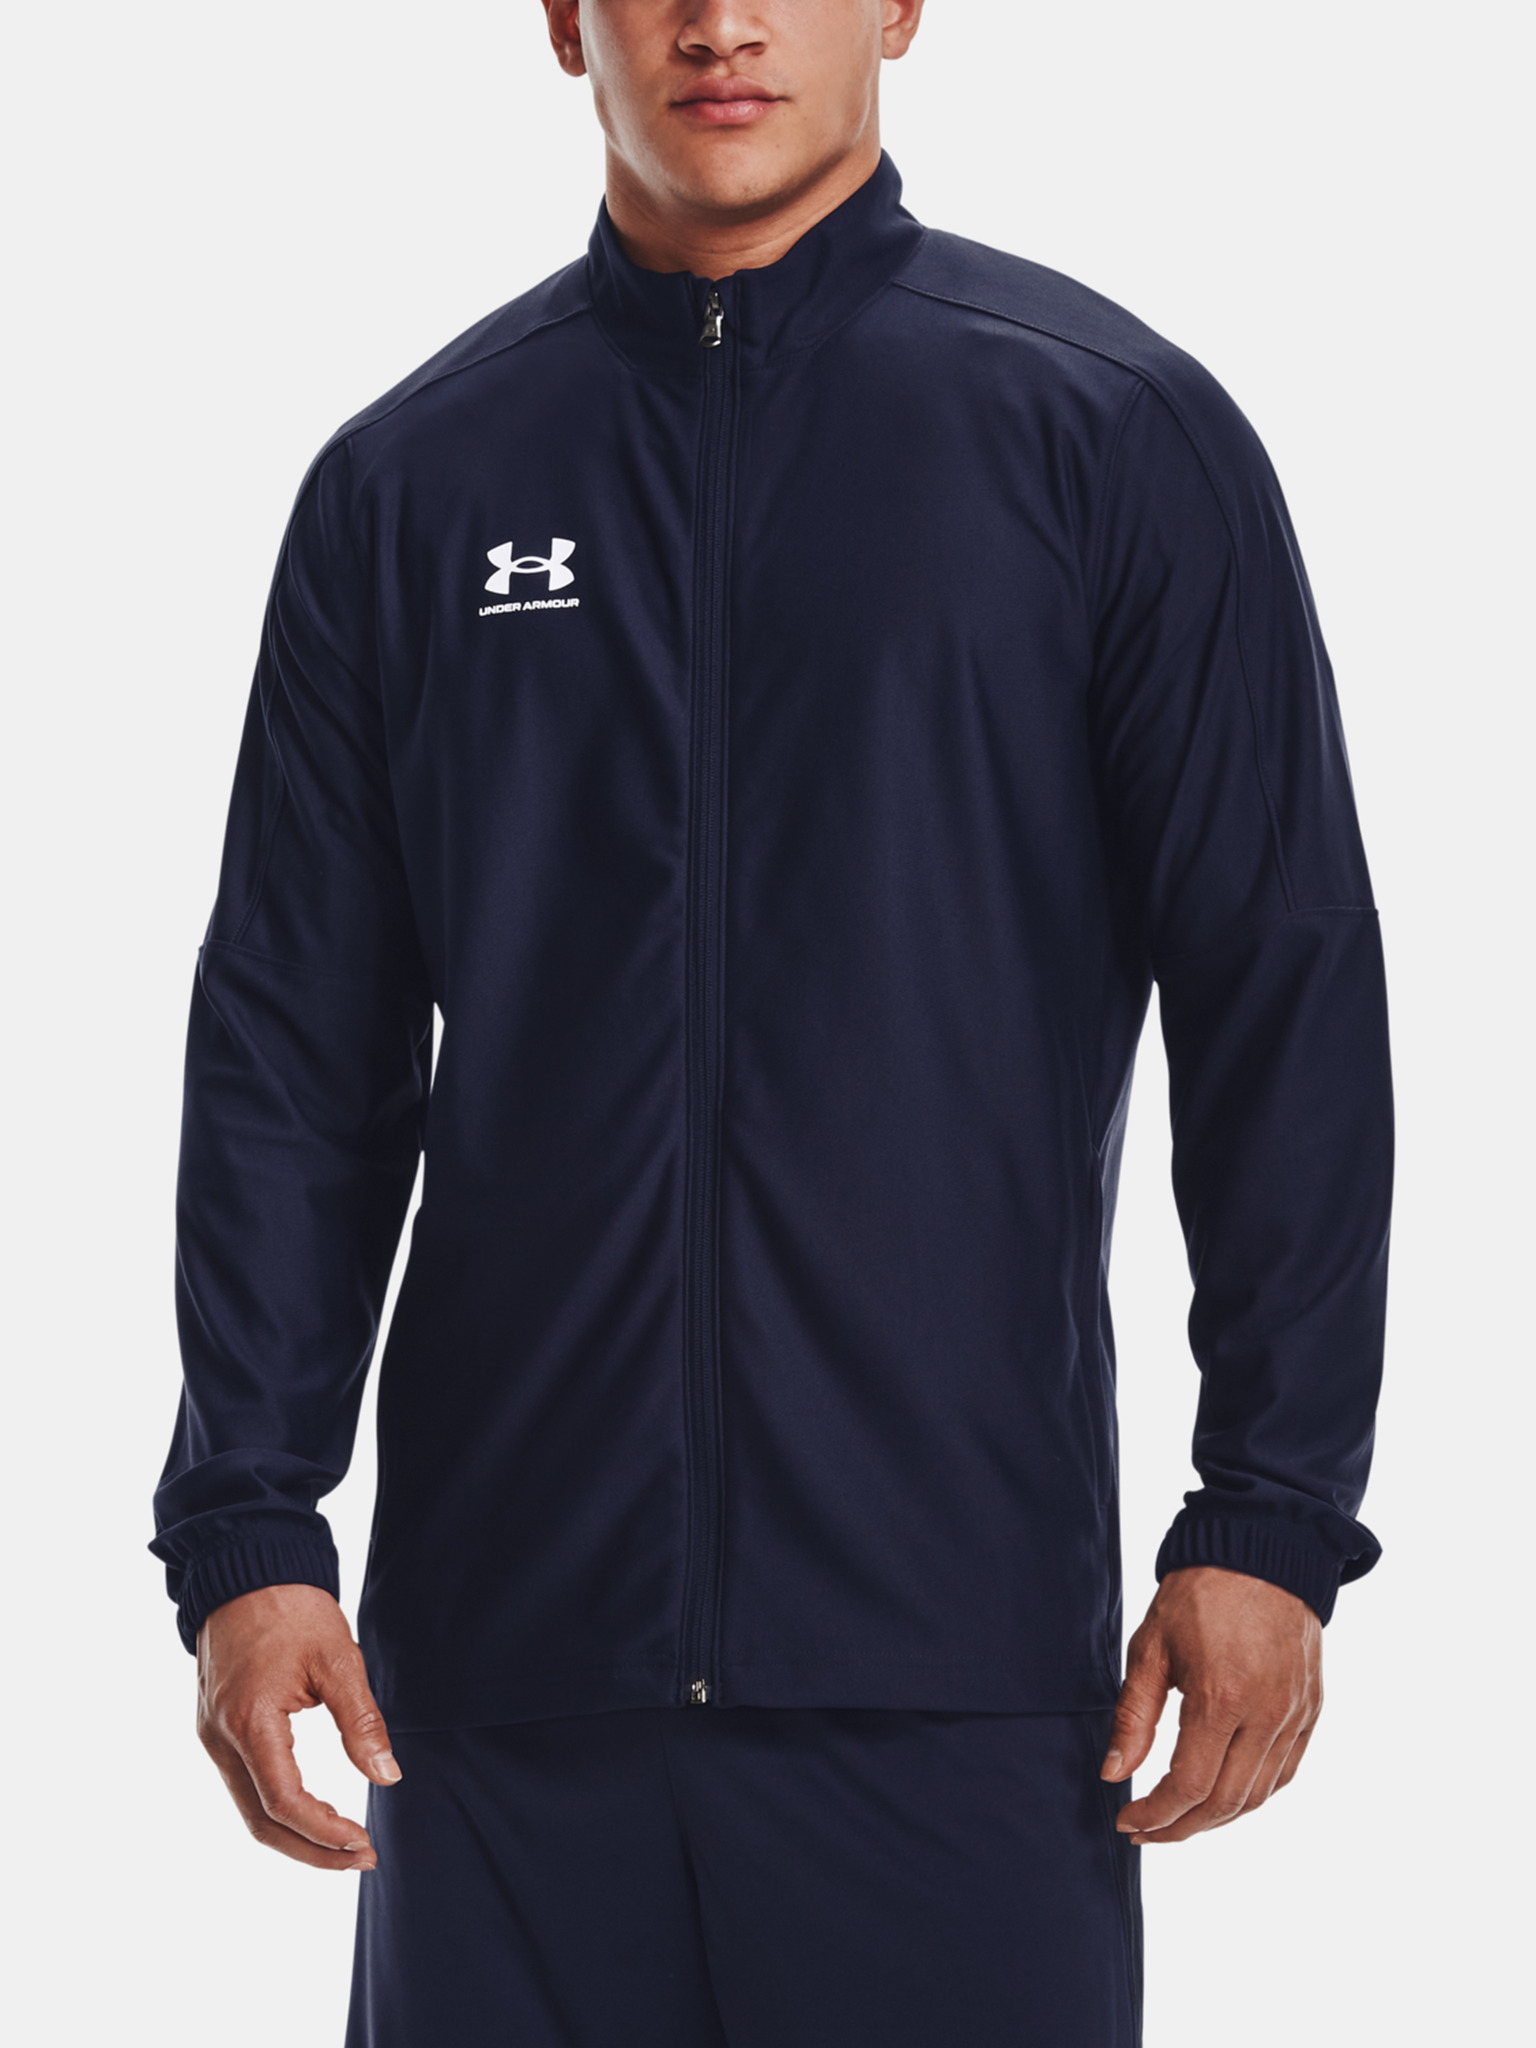 Under Armour, Knit Track Suit, Navy